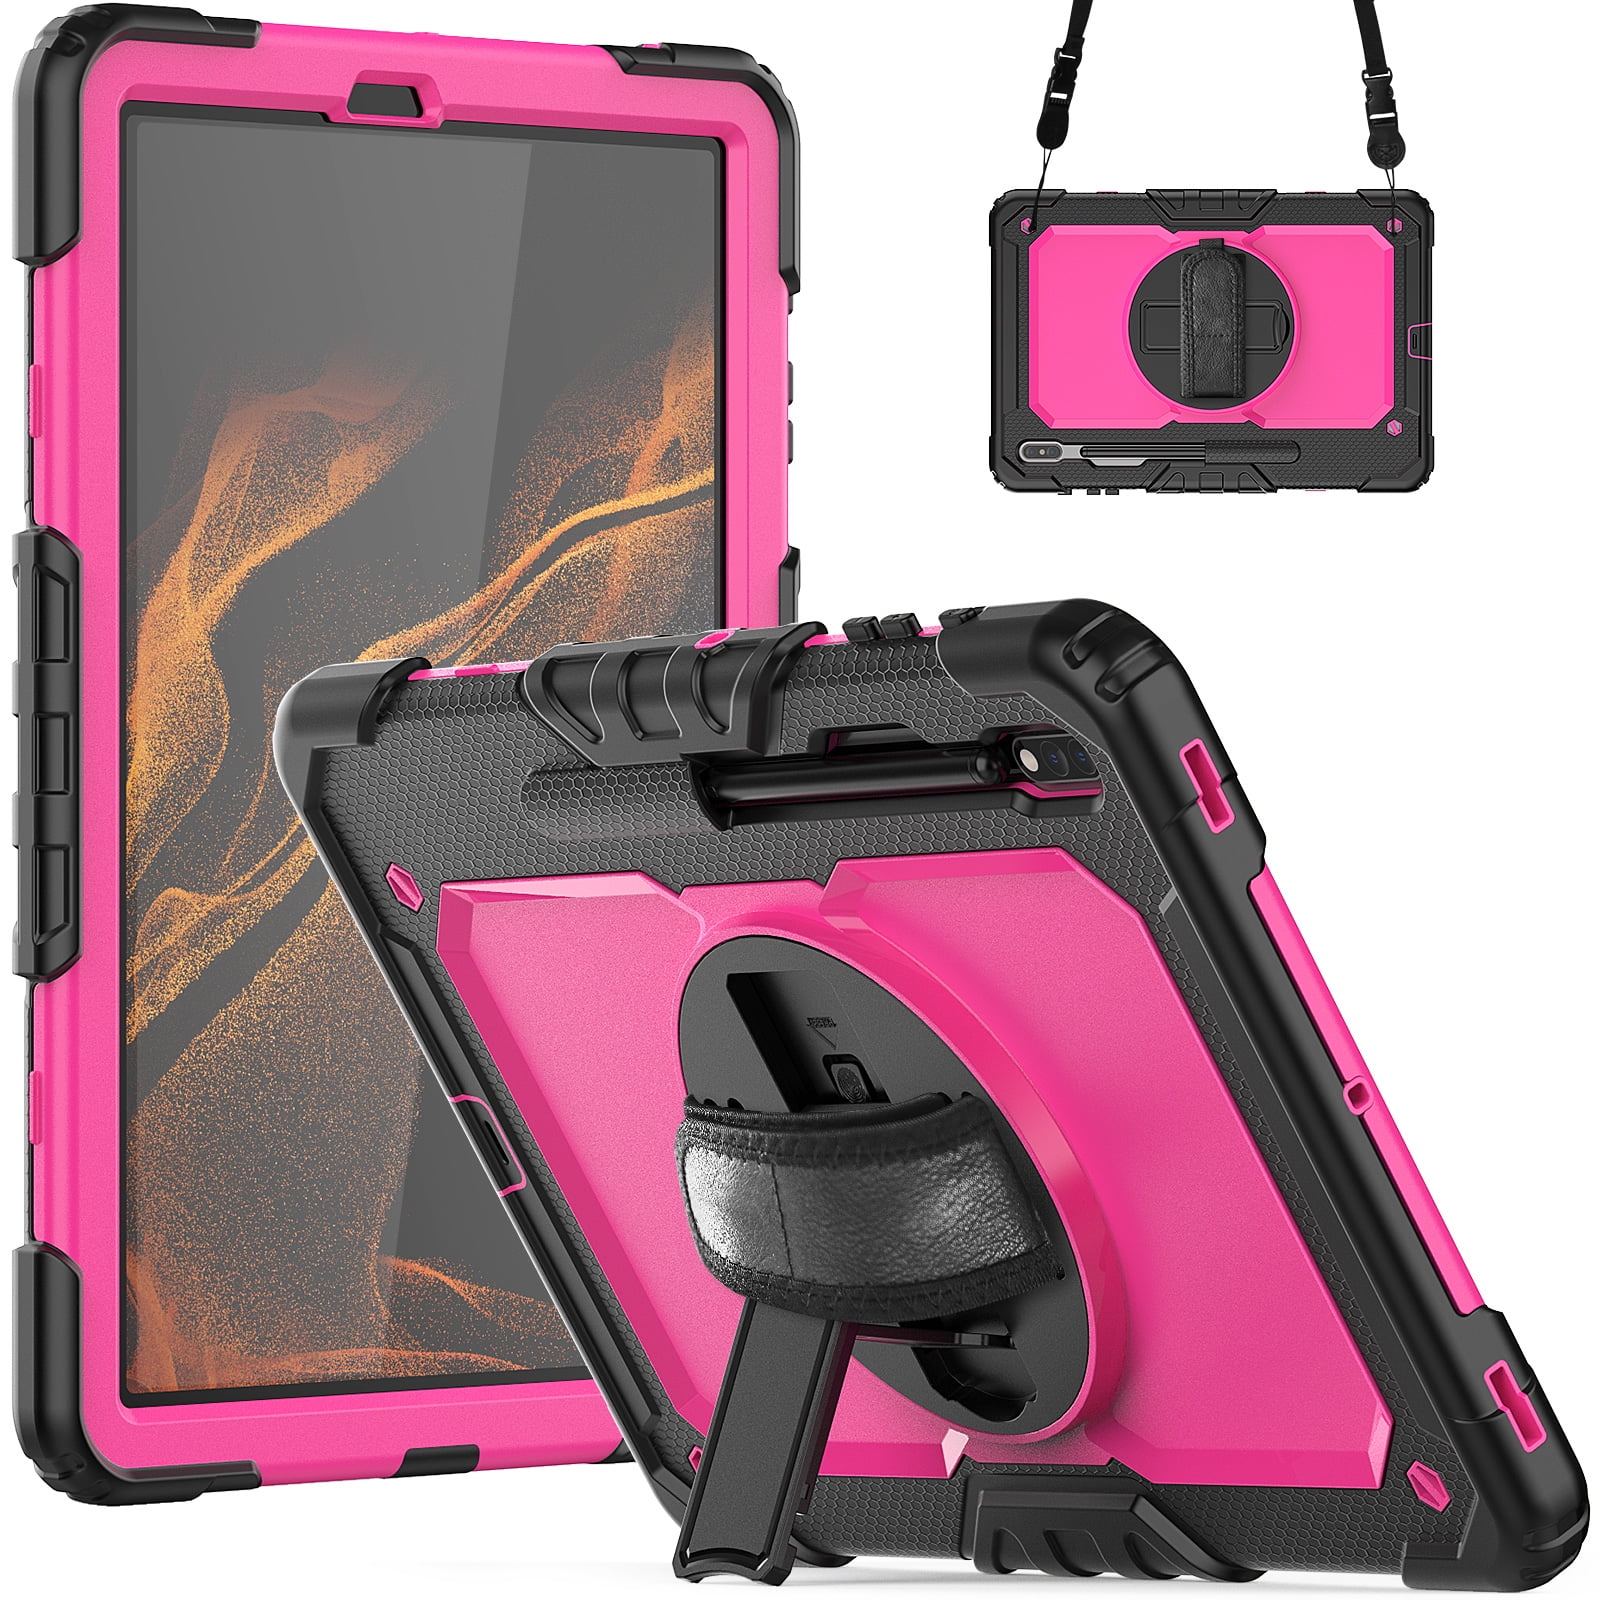 Allytech Case for Samsung Galaxy Tab S8 Plus/S8+ 12.4'' (2022) / S7 FE 5G  (2021) / S7 Plus (2020) 12.4 inch Heavy Duty Case With Screen Protector&360  Degree Swivel Kickstand & Hand Shoulder Strap